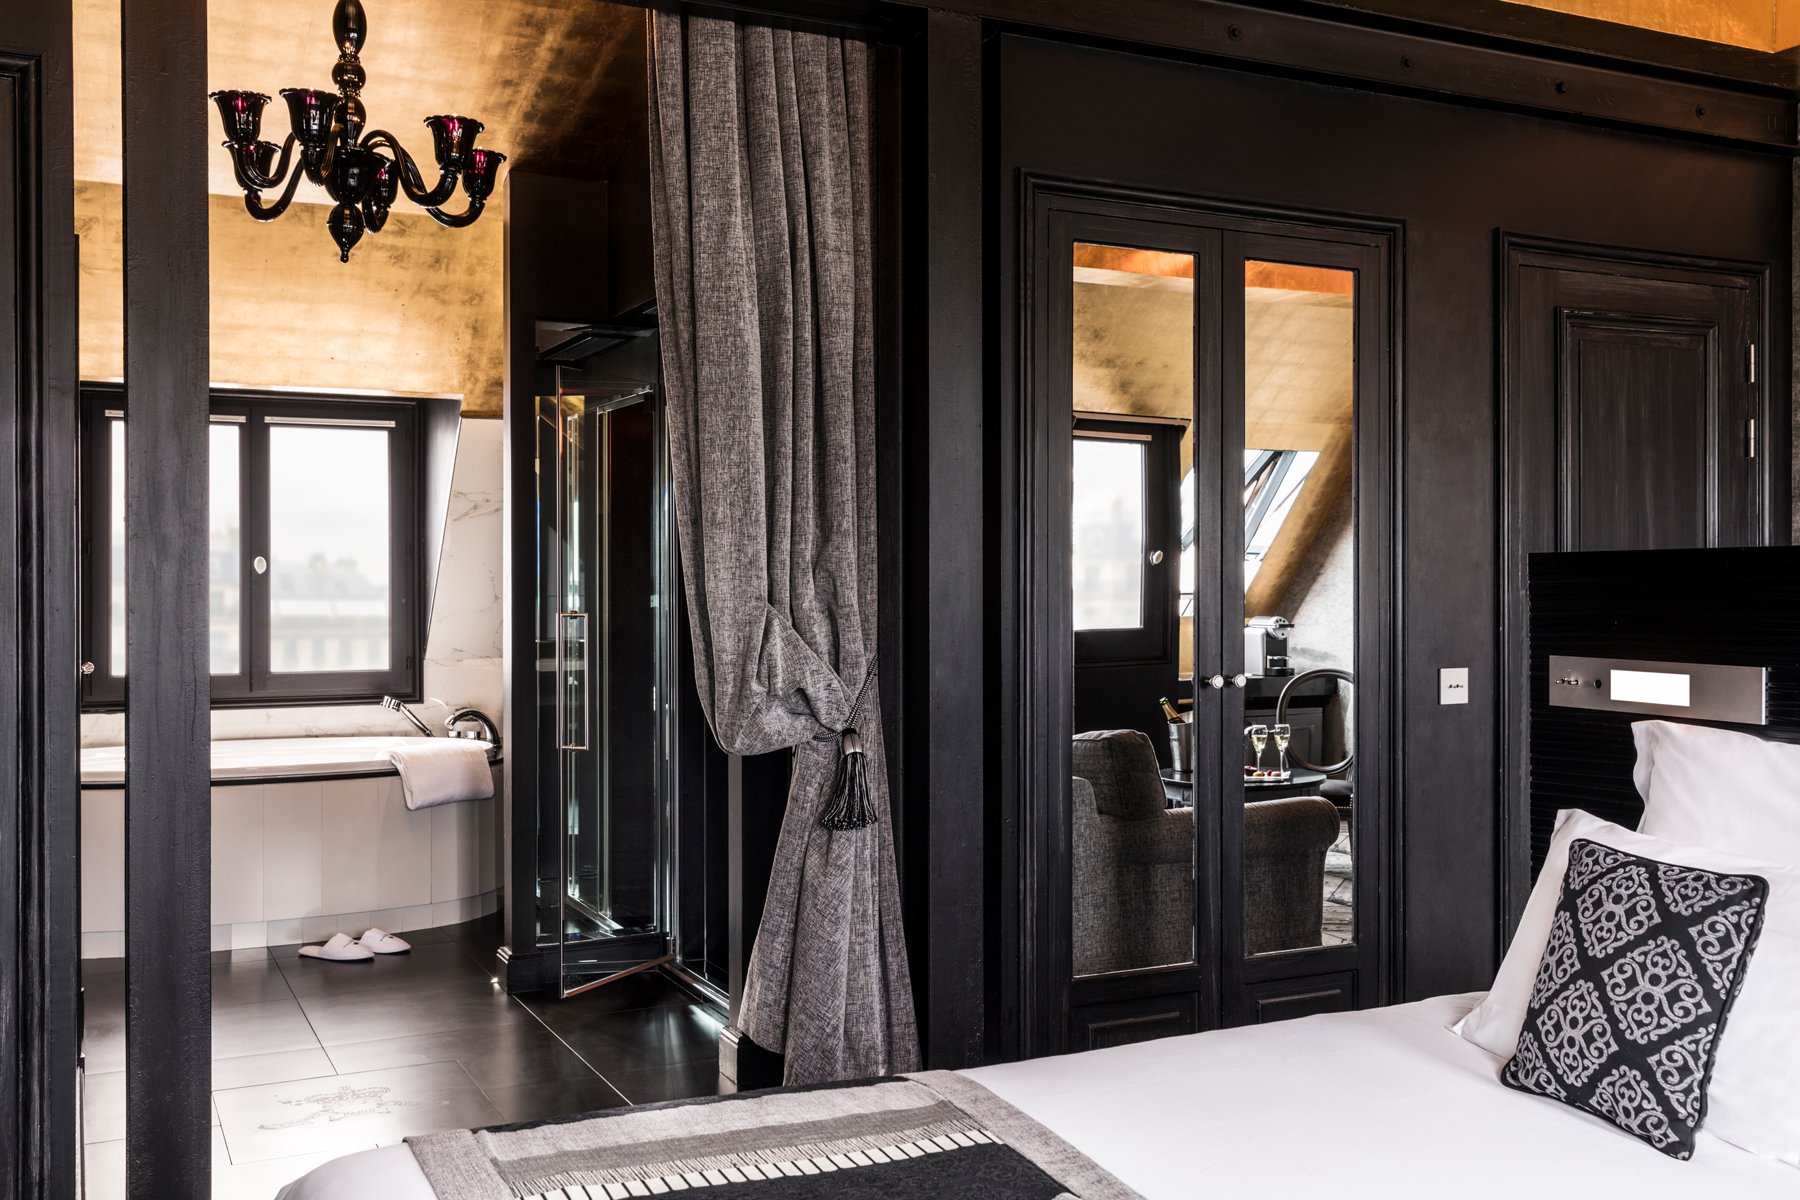 Maison Albar Hotels Le Champs-Elysées | Hotel rooms with private whirlpool